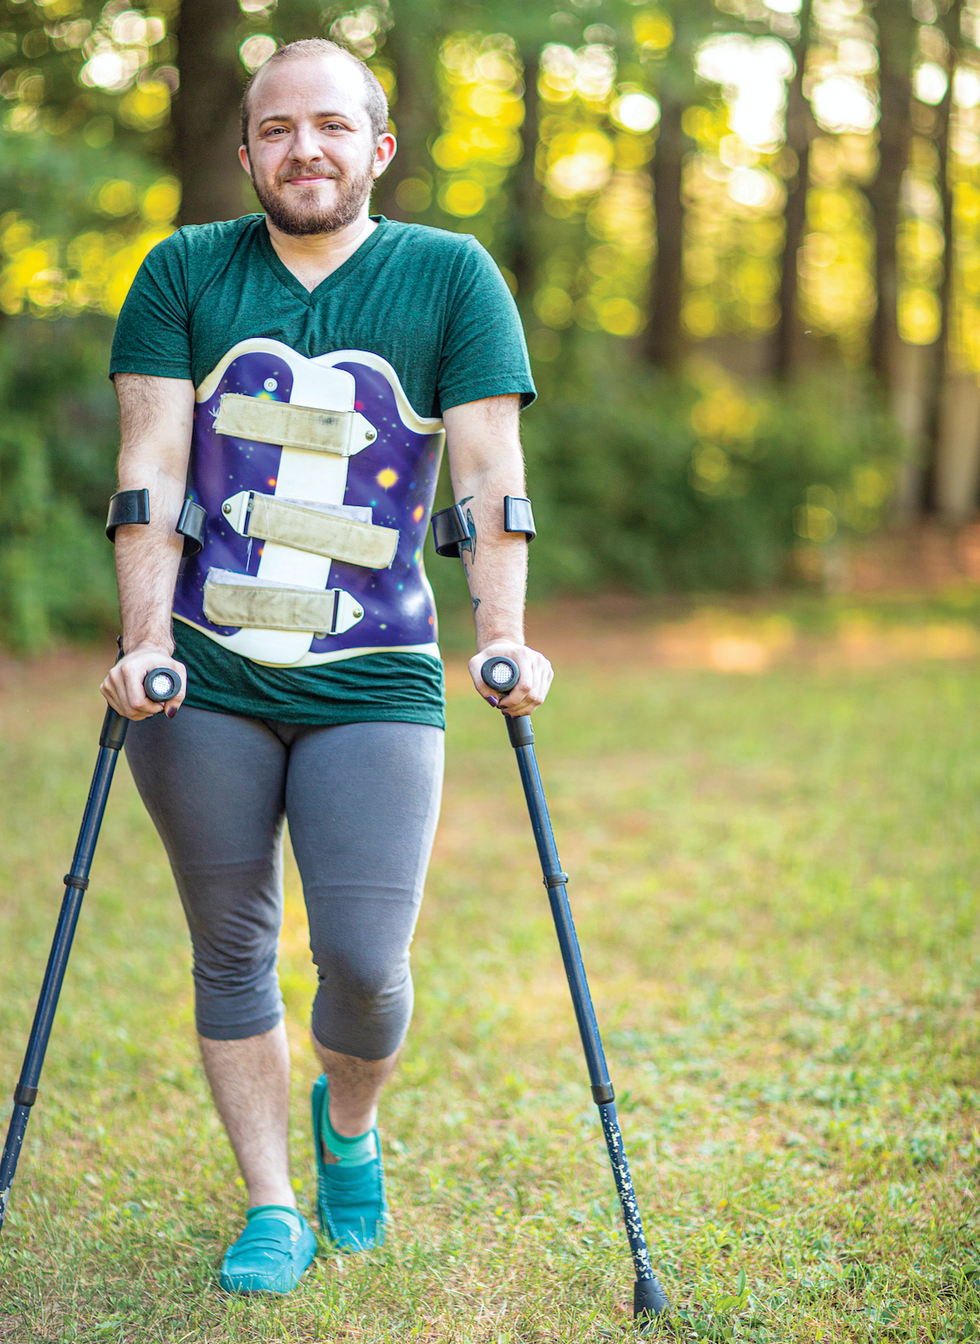 Toby MacNutt stands with crutches and a back brace, on a green landscape